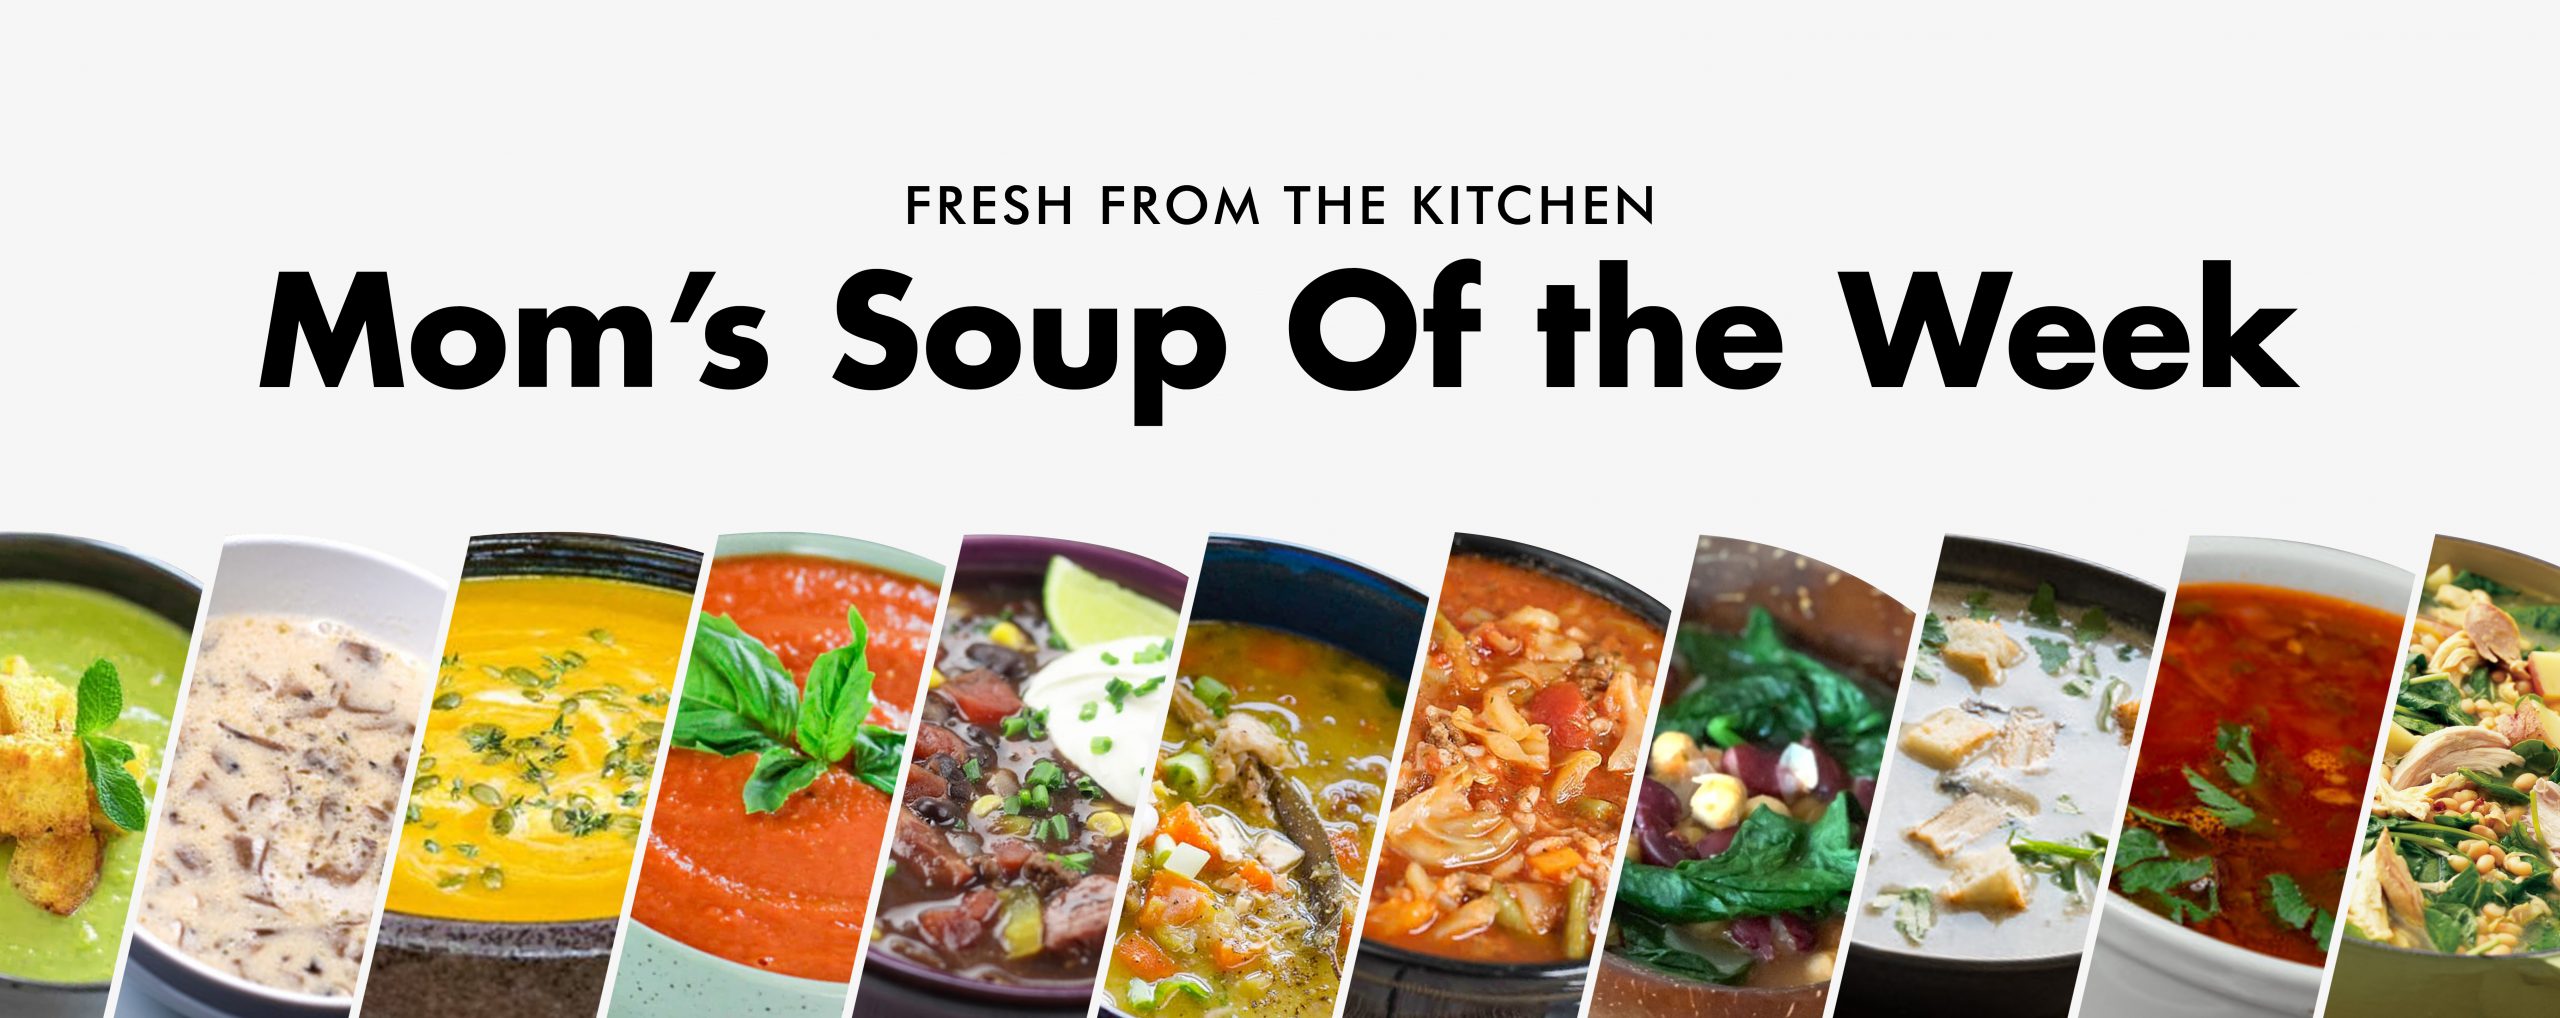 Soup Of The Week | Gerrity's Grocery Store